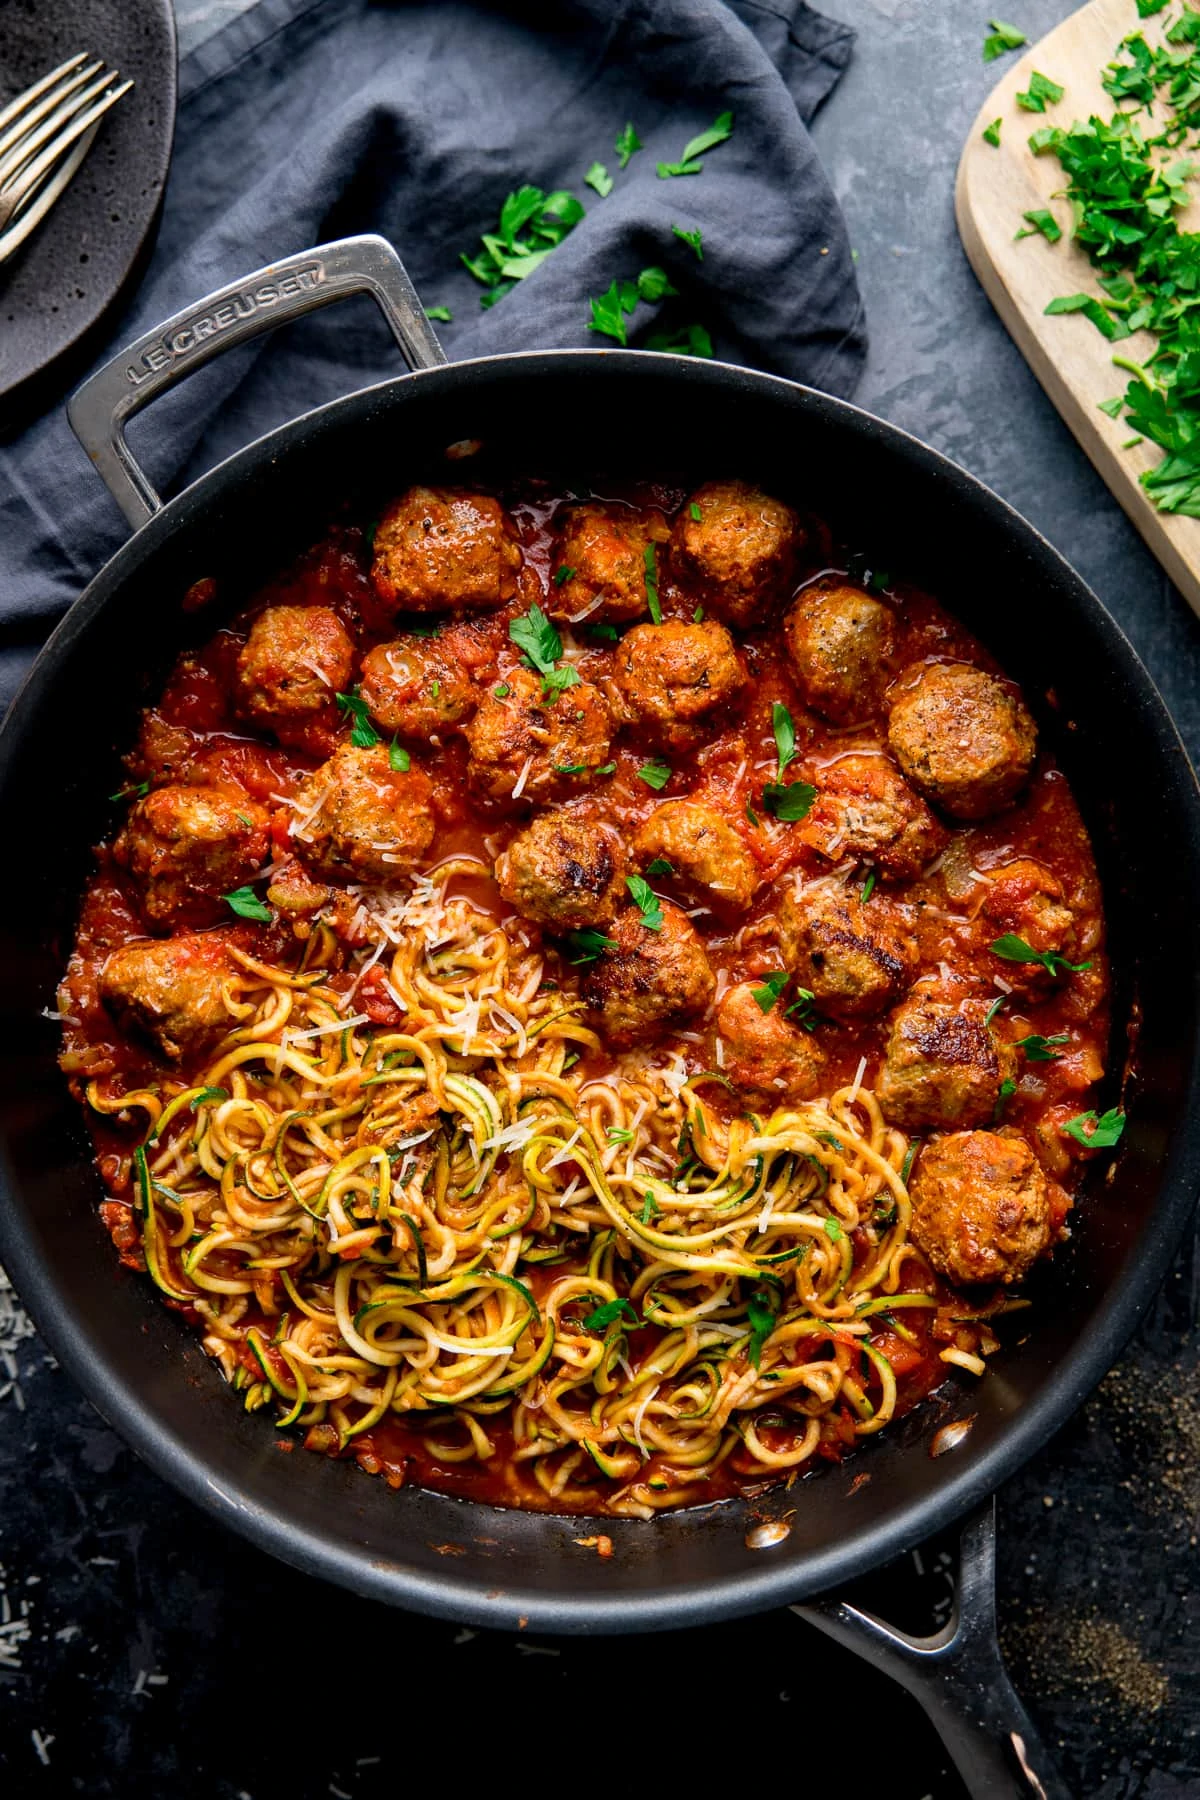 Turkey meatballs and courgetti in a pan topped with parsley, on a dark background.